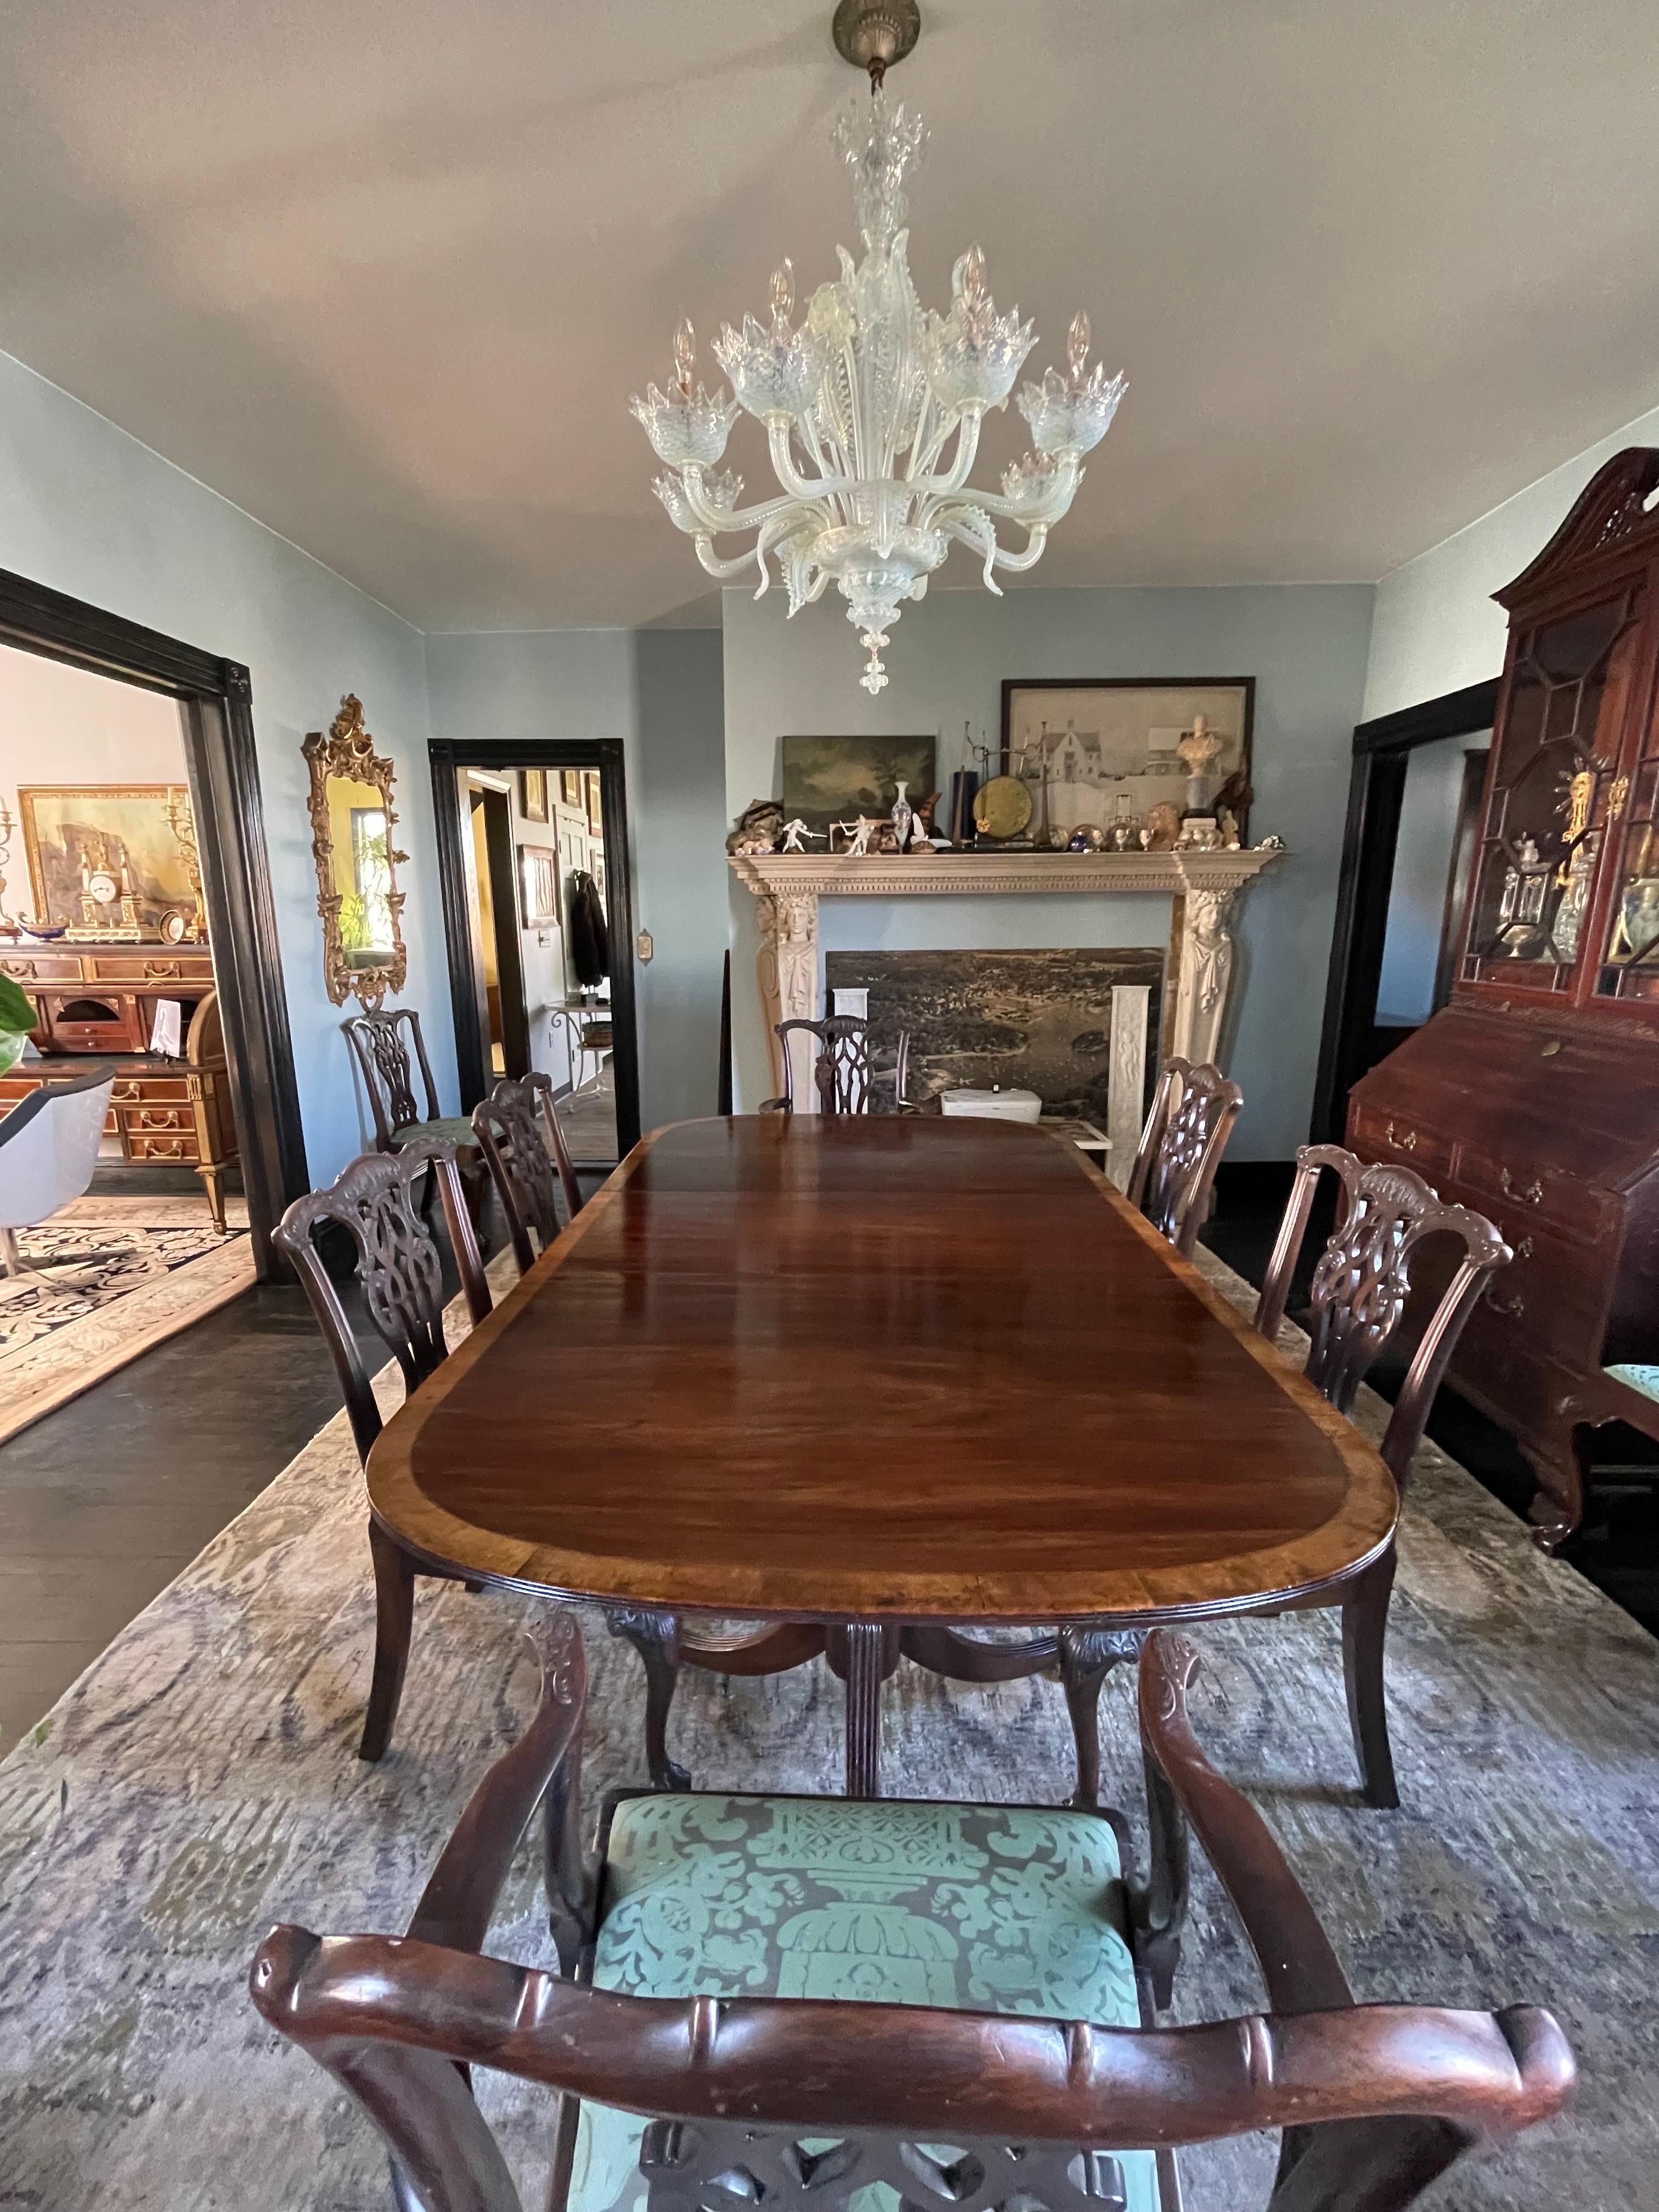 An elegant late 19th century Regency solid mahogany two pedestal dining table with two large leaves seating 8-10 people. 
The mahogany top has a vibrant pattern and retains its original contrasting border made of European Walnut. The finish has